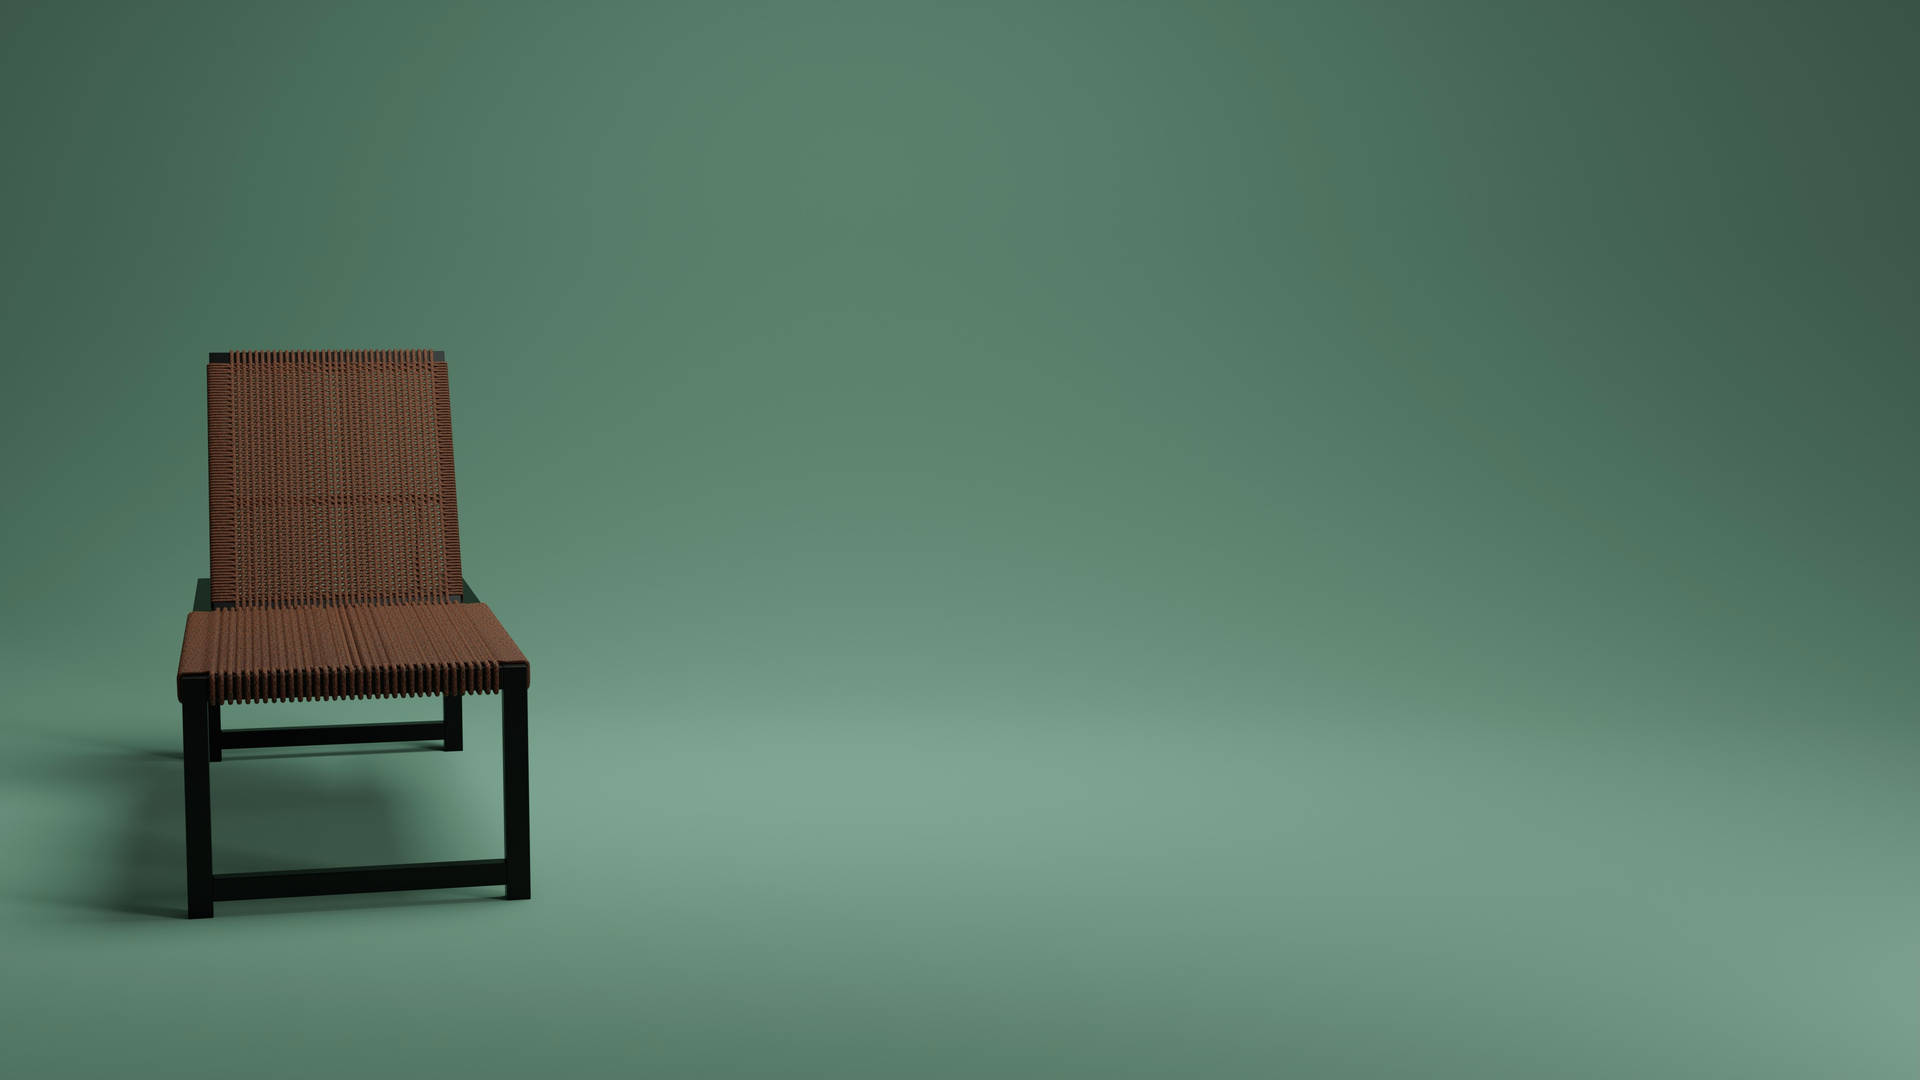 Chair On Green Minimalist Wall Background